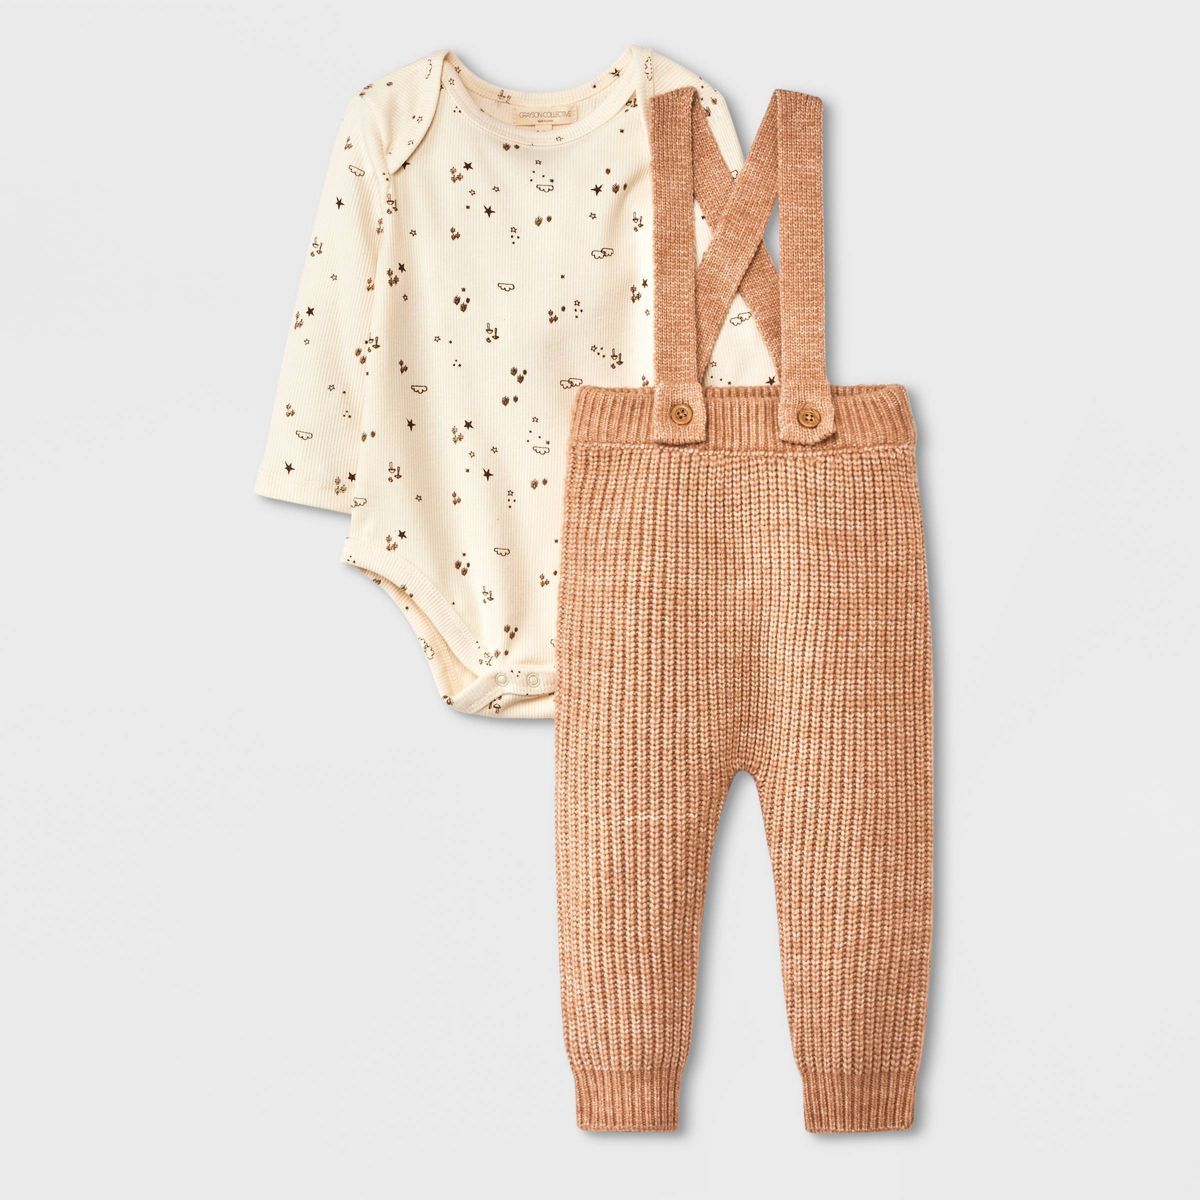 Grayson Collective Baby Girls' 2pc Top & Bottom Set - Off-White | Target